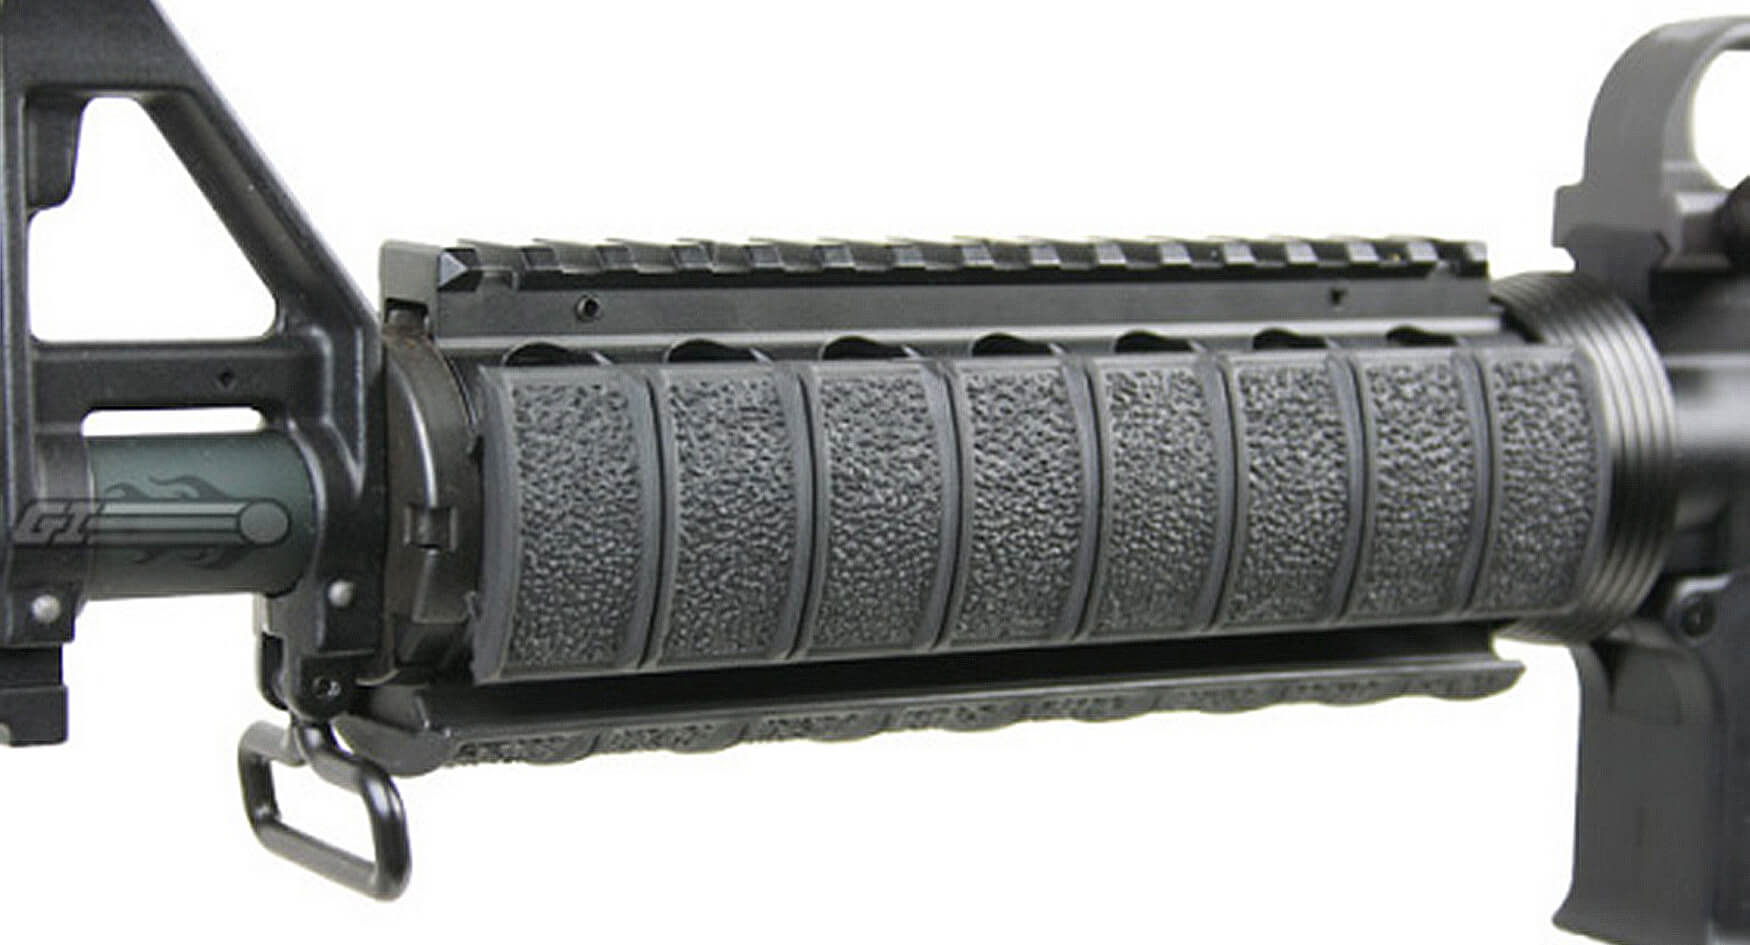 New 4 pieces Troy Rail cover for picatinny rail Airsoft Black 